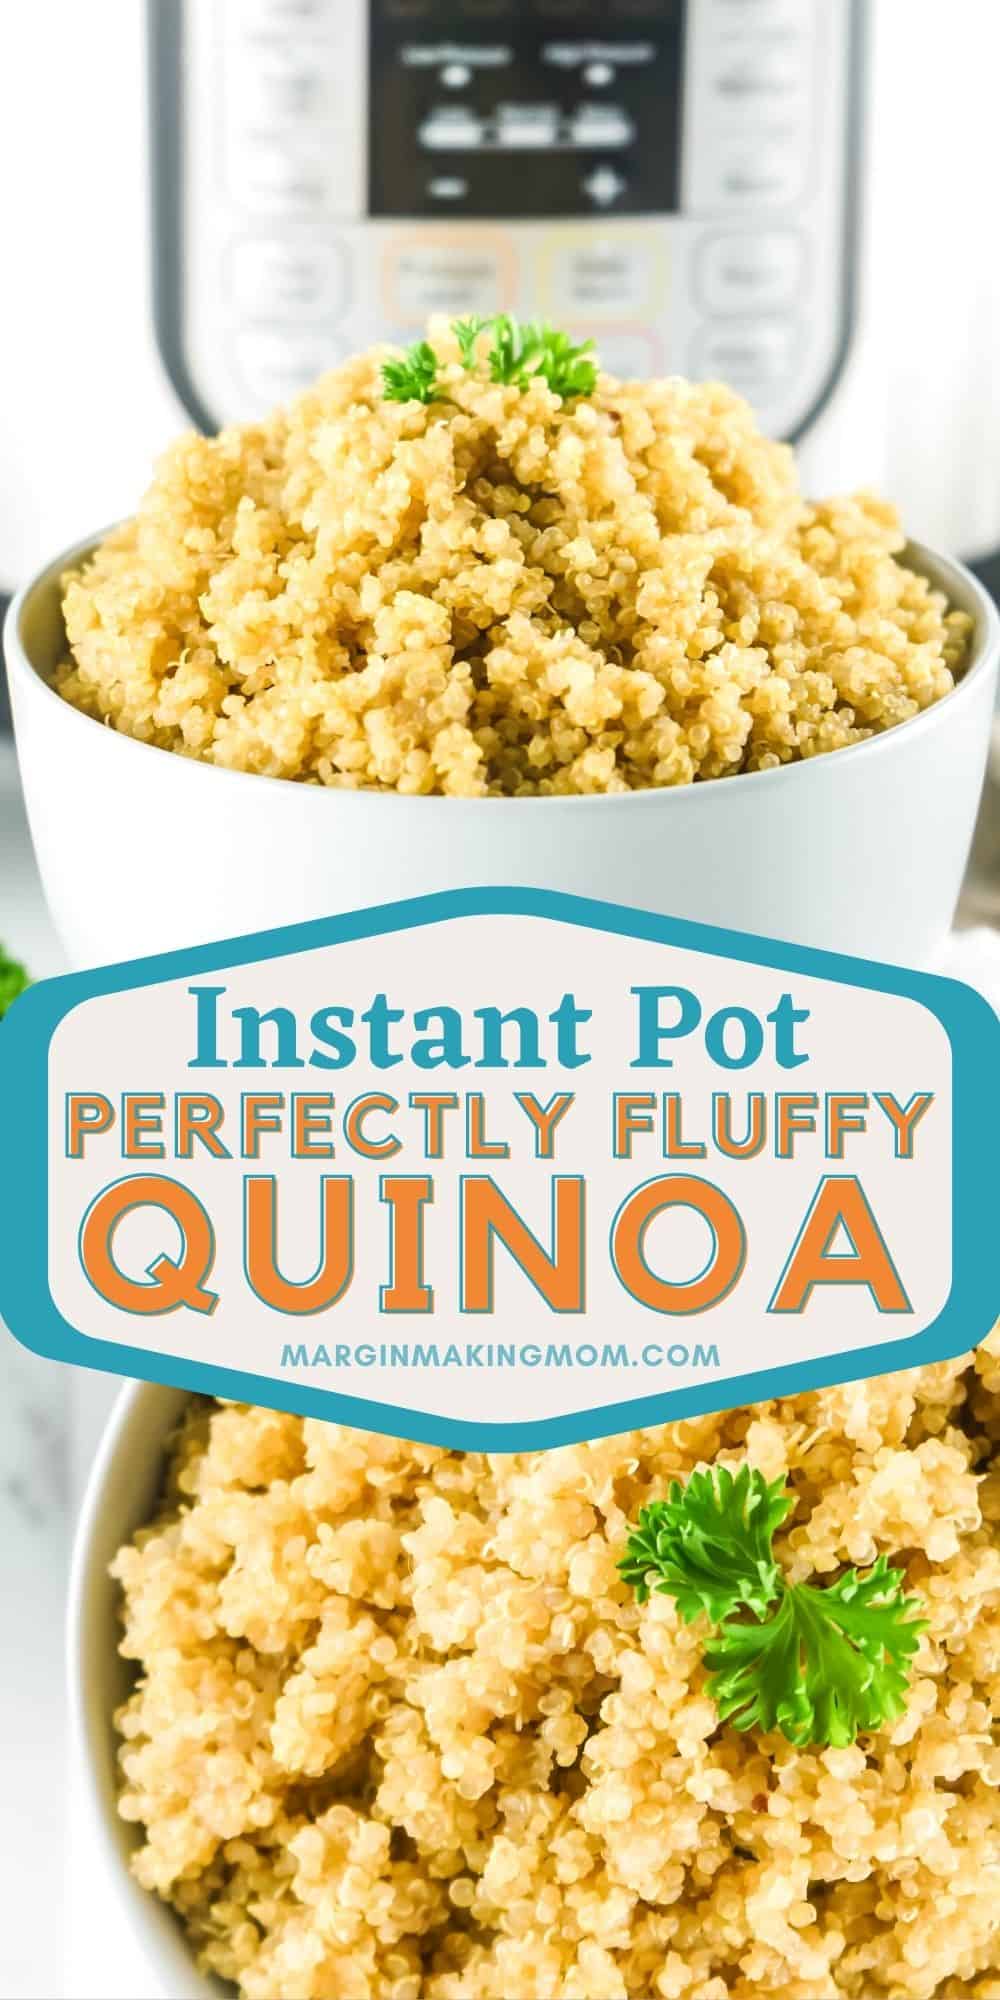 collage image of two photos--one is a bowl of quinoa in front of the instant pot, the other is an overhead detail view of a bowl of quinoa